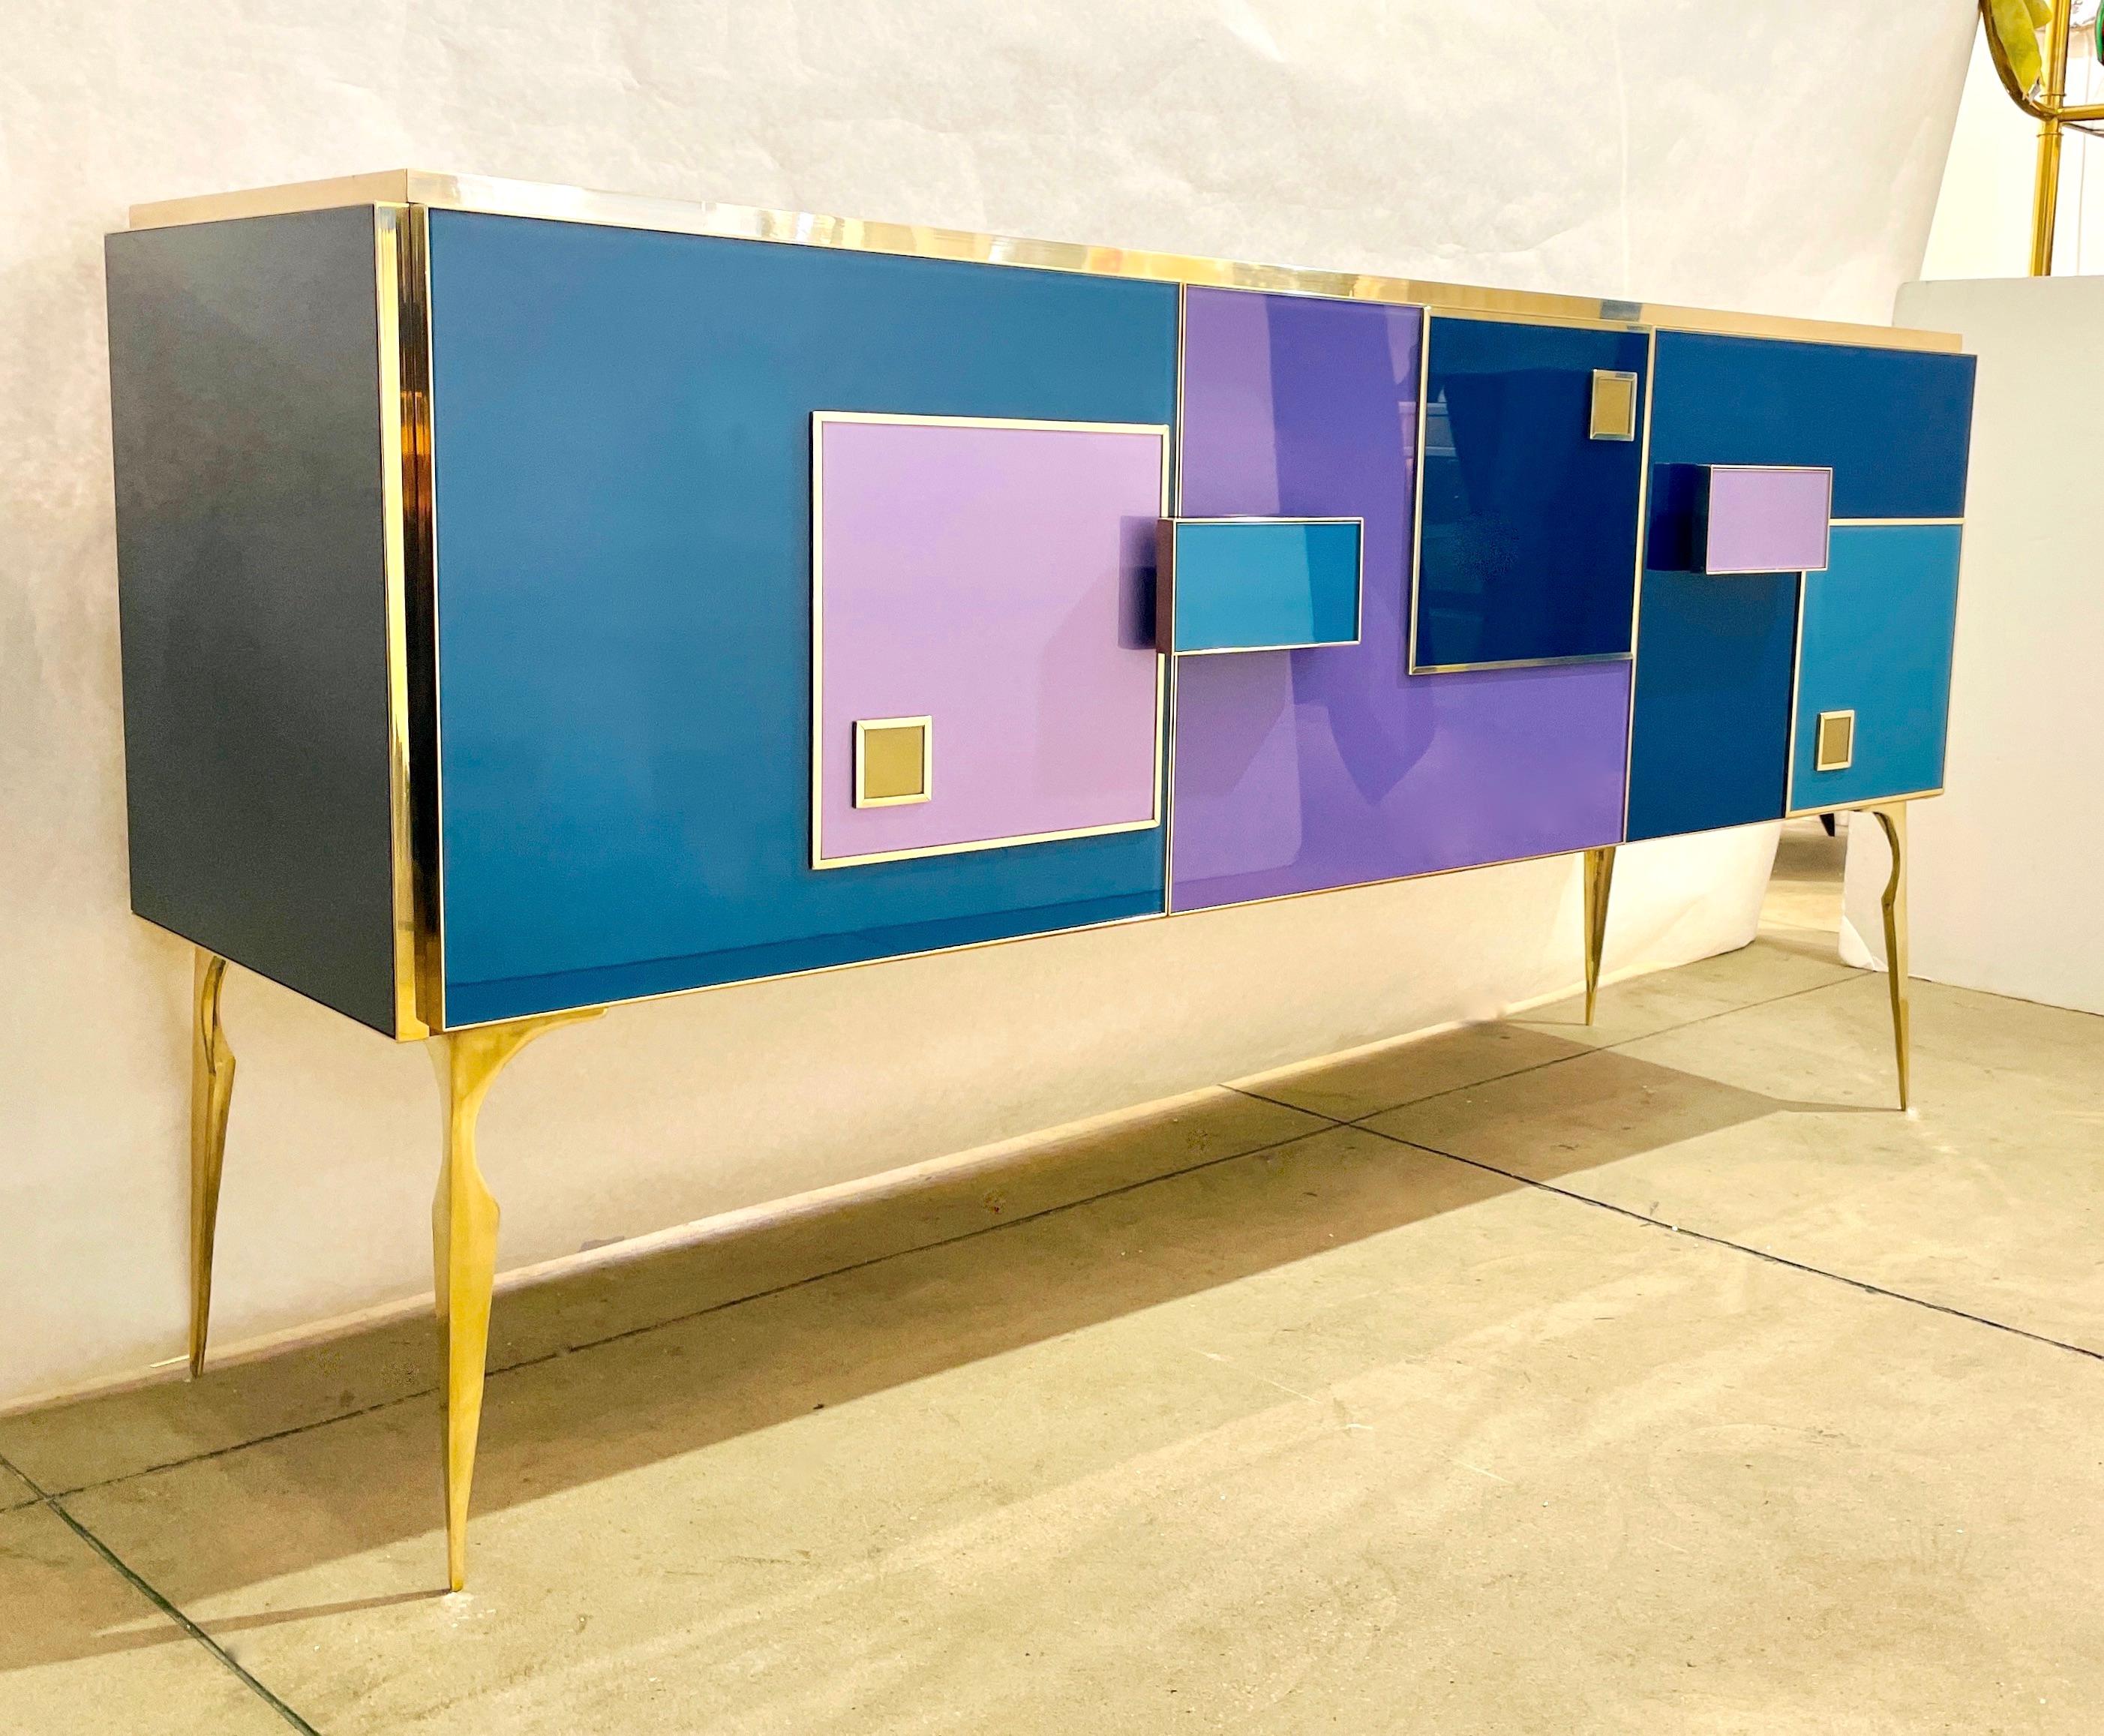 A creative 2-compartment, 3-door modern credenza, entirely handmade in Italy with high-quality details of execution in an attractive geometric decor with raised pattern and handles, finished wooden back. An elegant, artistic, functional buffet or